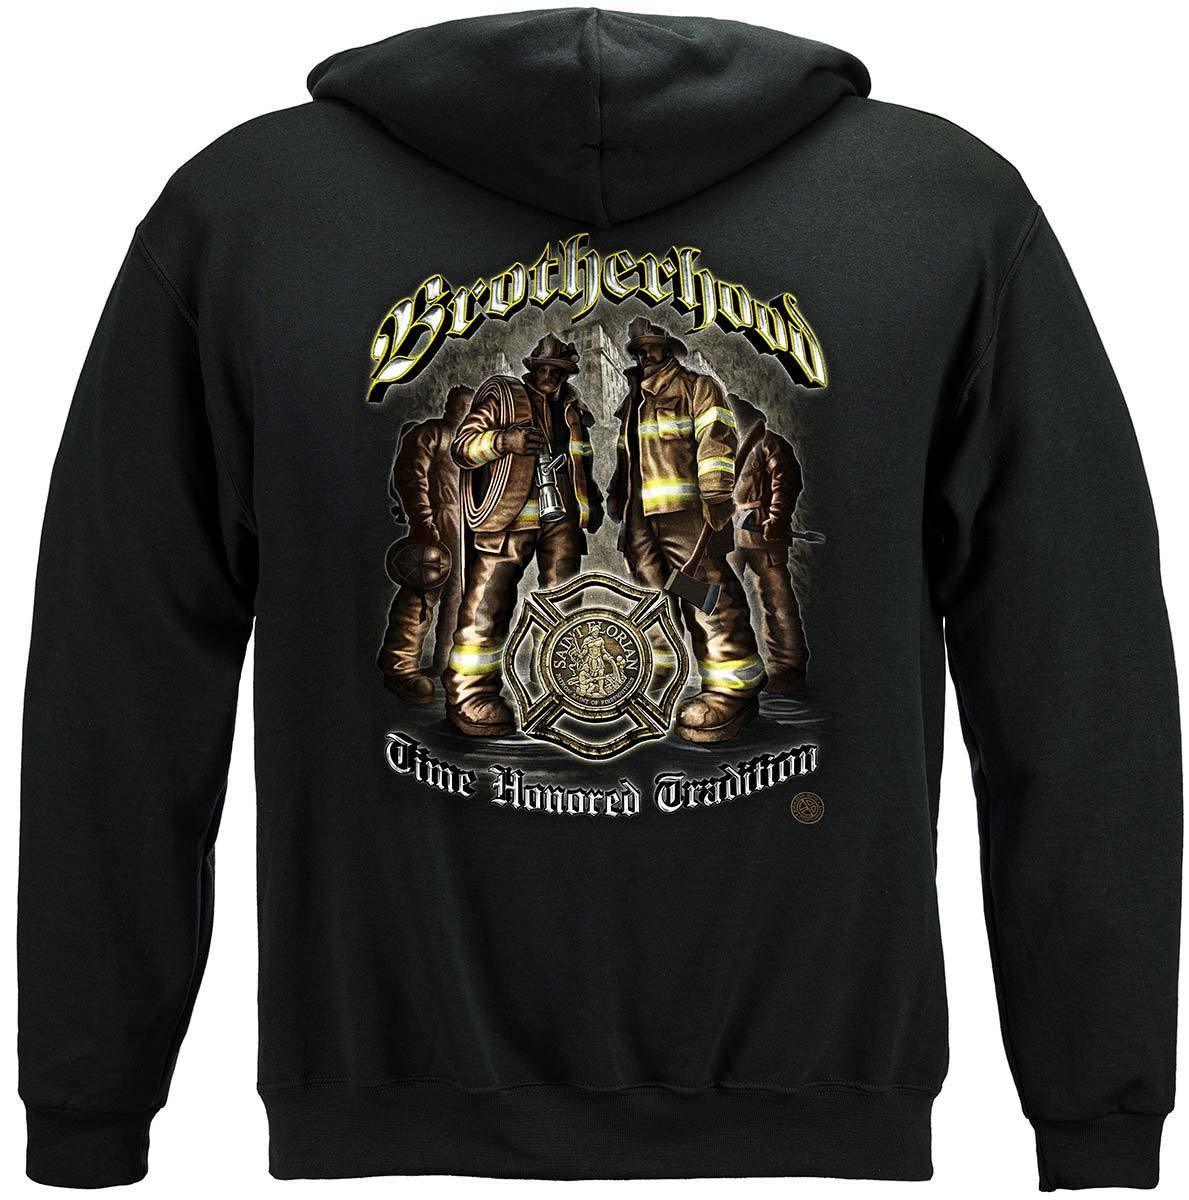 Firefighter Time Honor Tradition Premium Hoodie – Military Republic